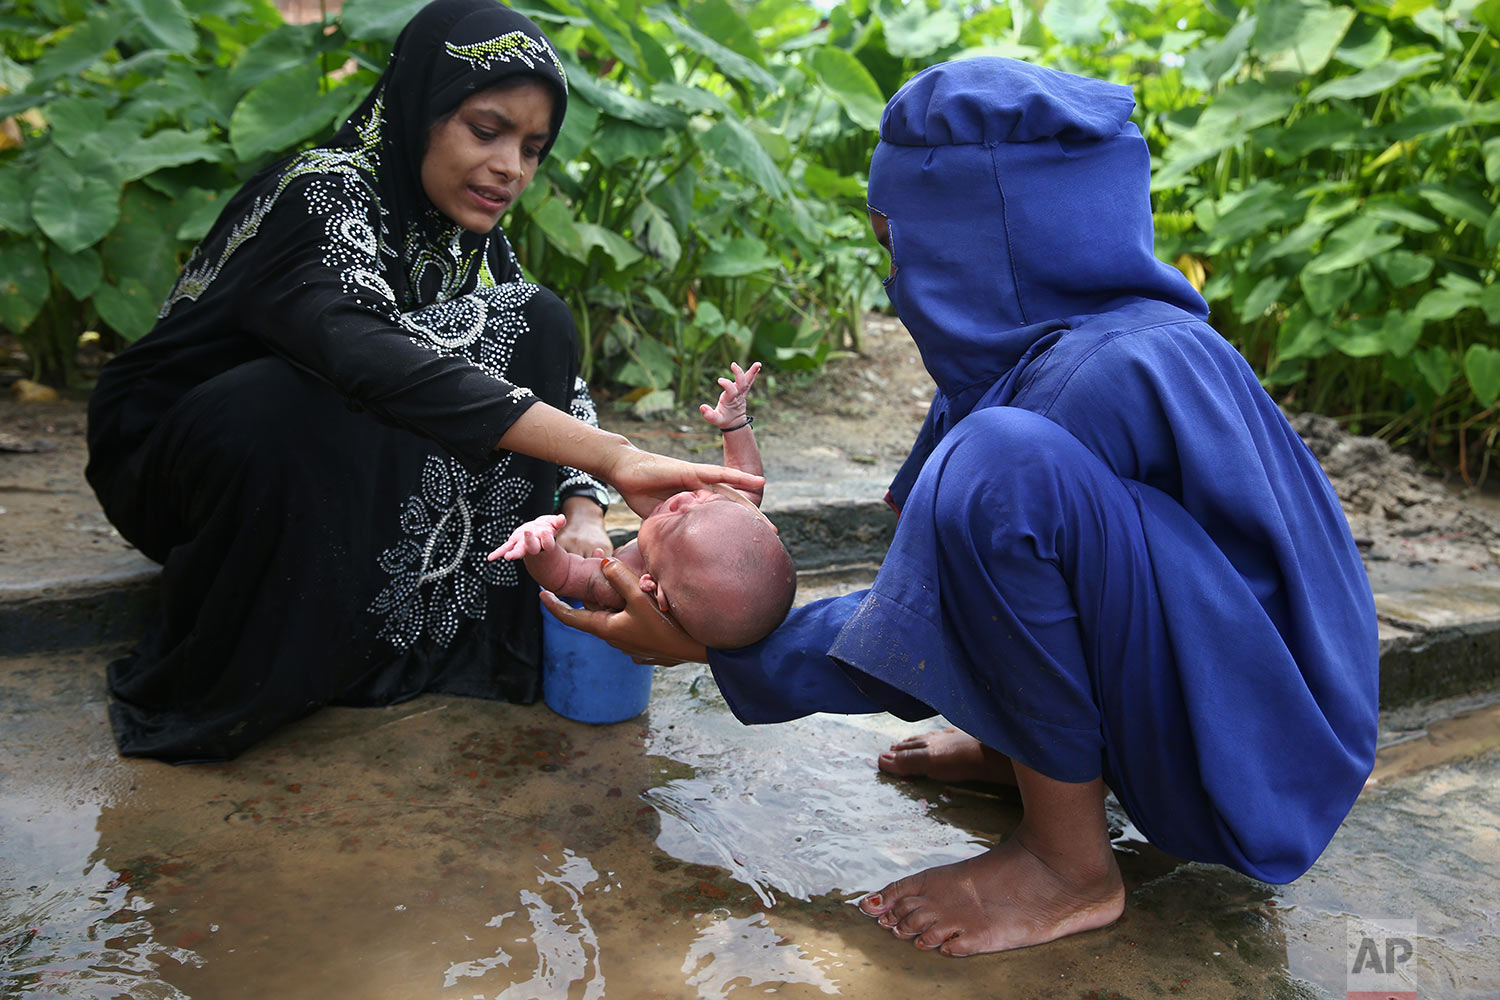 Myanmar's Rohingya Muslim ethnic minority women bathe a week-old infant at the Kutupalong makeshift refugee camp in Cox's Bazar, Bangladesh, Wednesday, Aug. 30, 2017. Thousands of Rohingya Muslims have fled fresh violence in Myanmar and crossed into Bangladesh in less than a week, with hundreds stranded in no man's land at the countries' border, the International Organization for Migration said Wednesday. (AP Photo/Mushfiqul Alam)